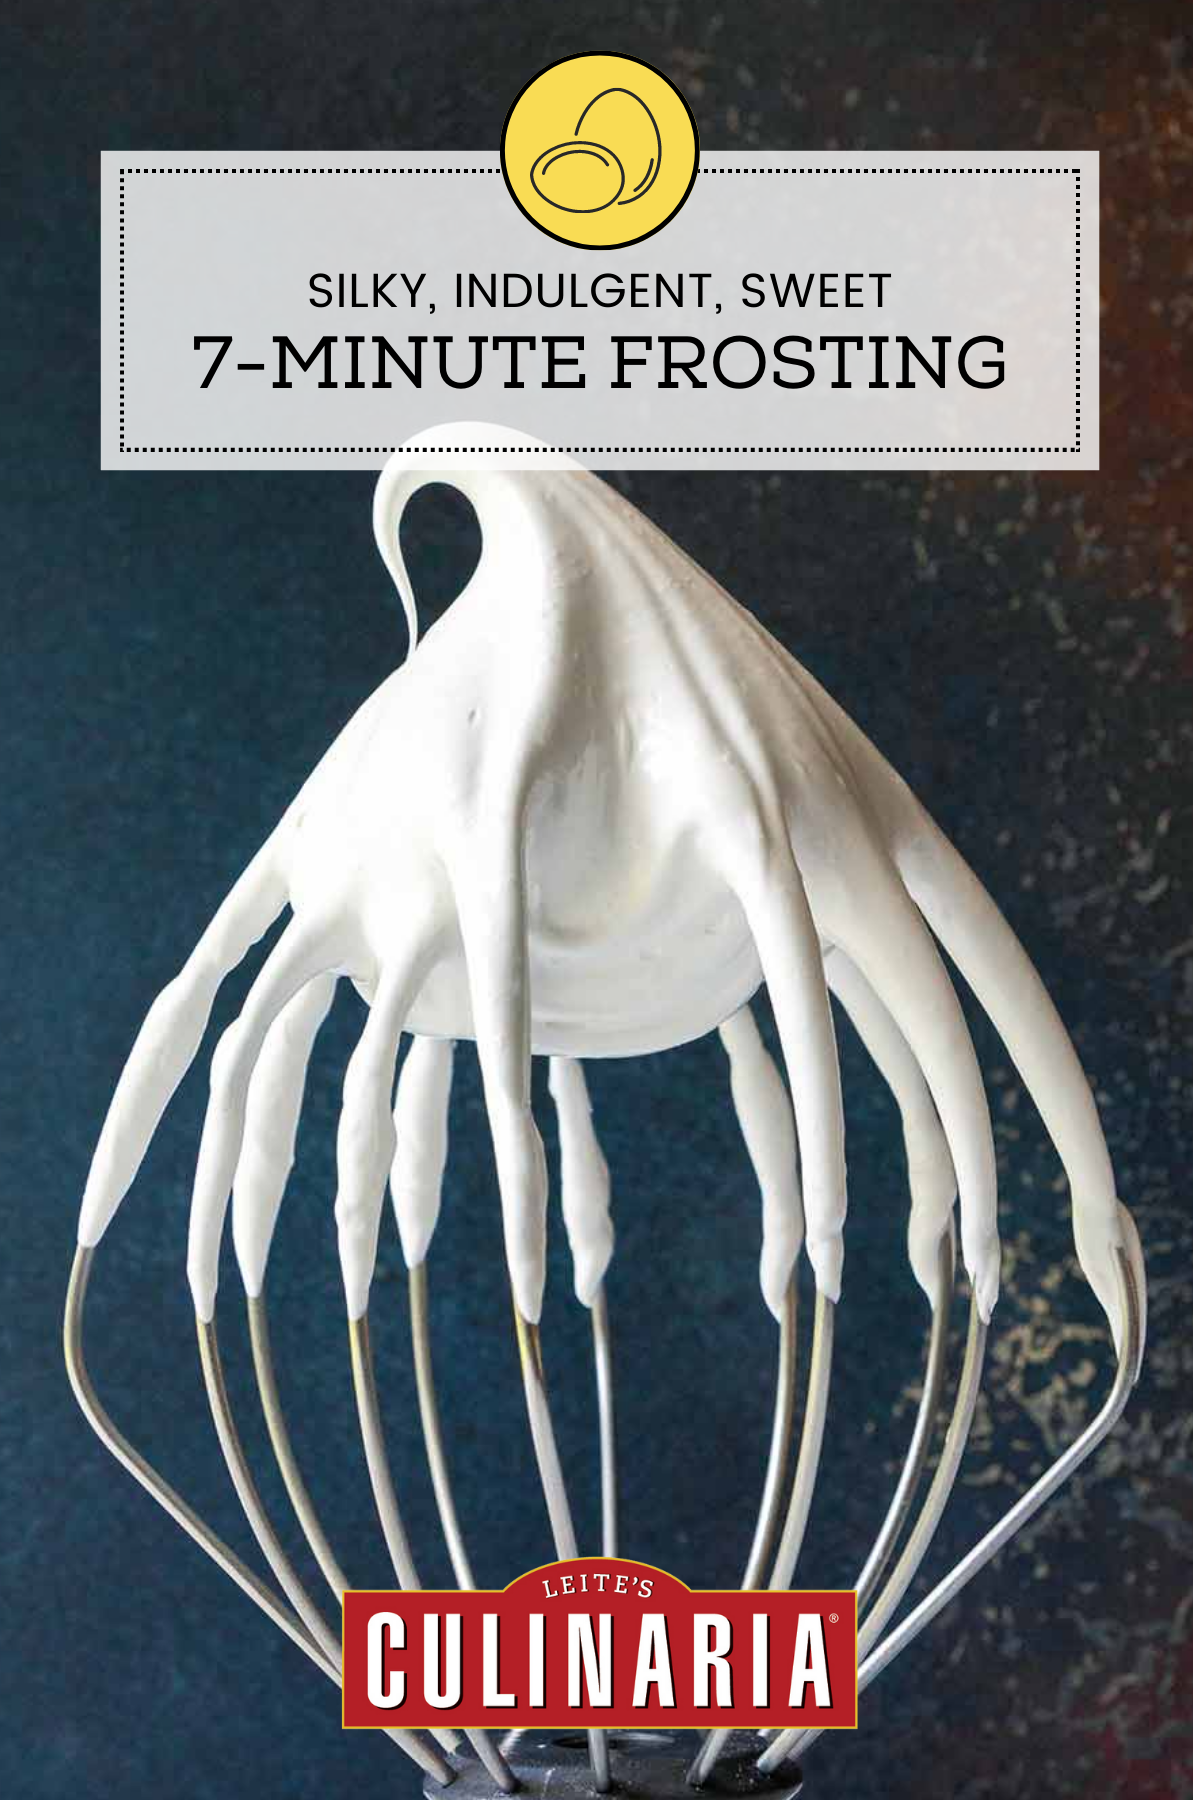 A large stand-mixer beater covered with white, fluffy seven minute frosting.